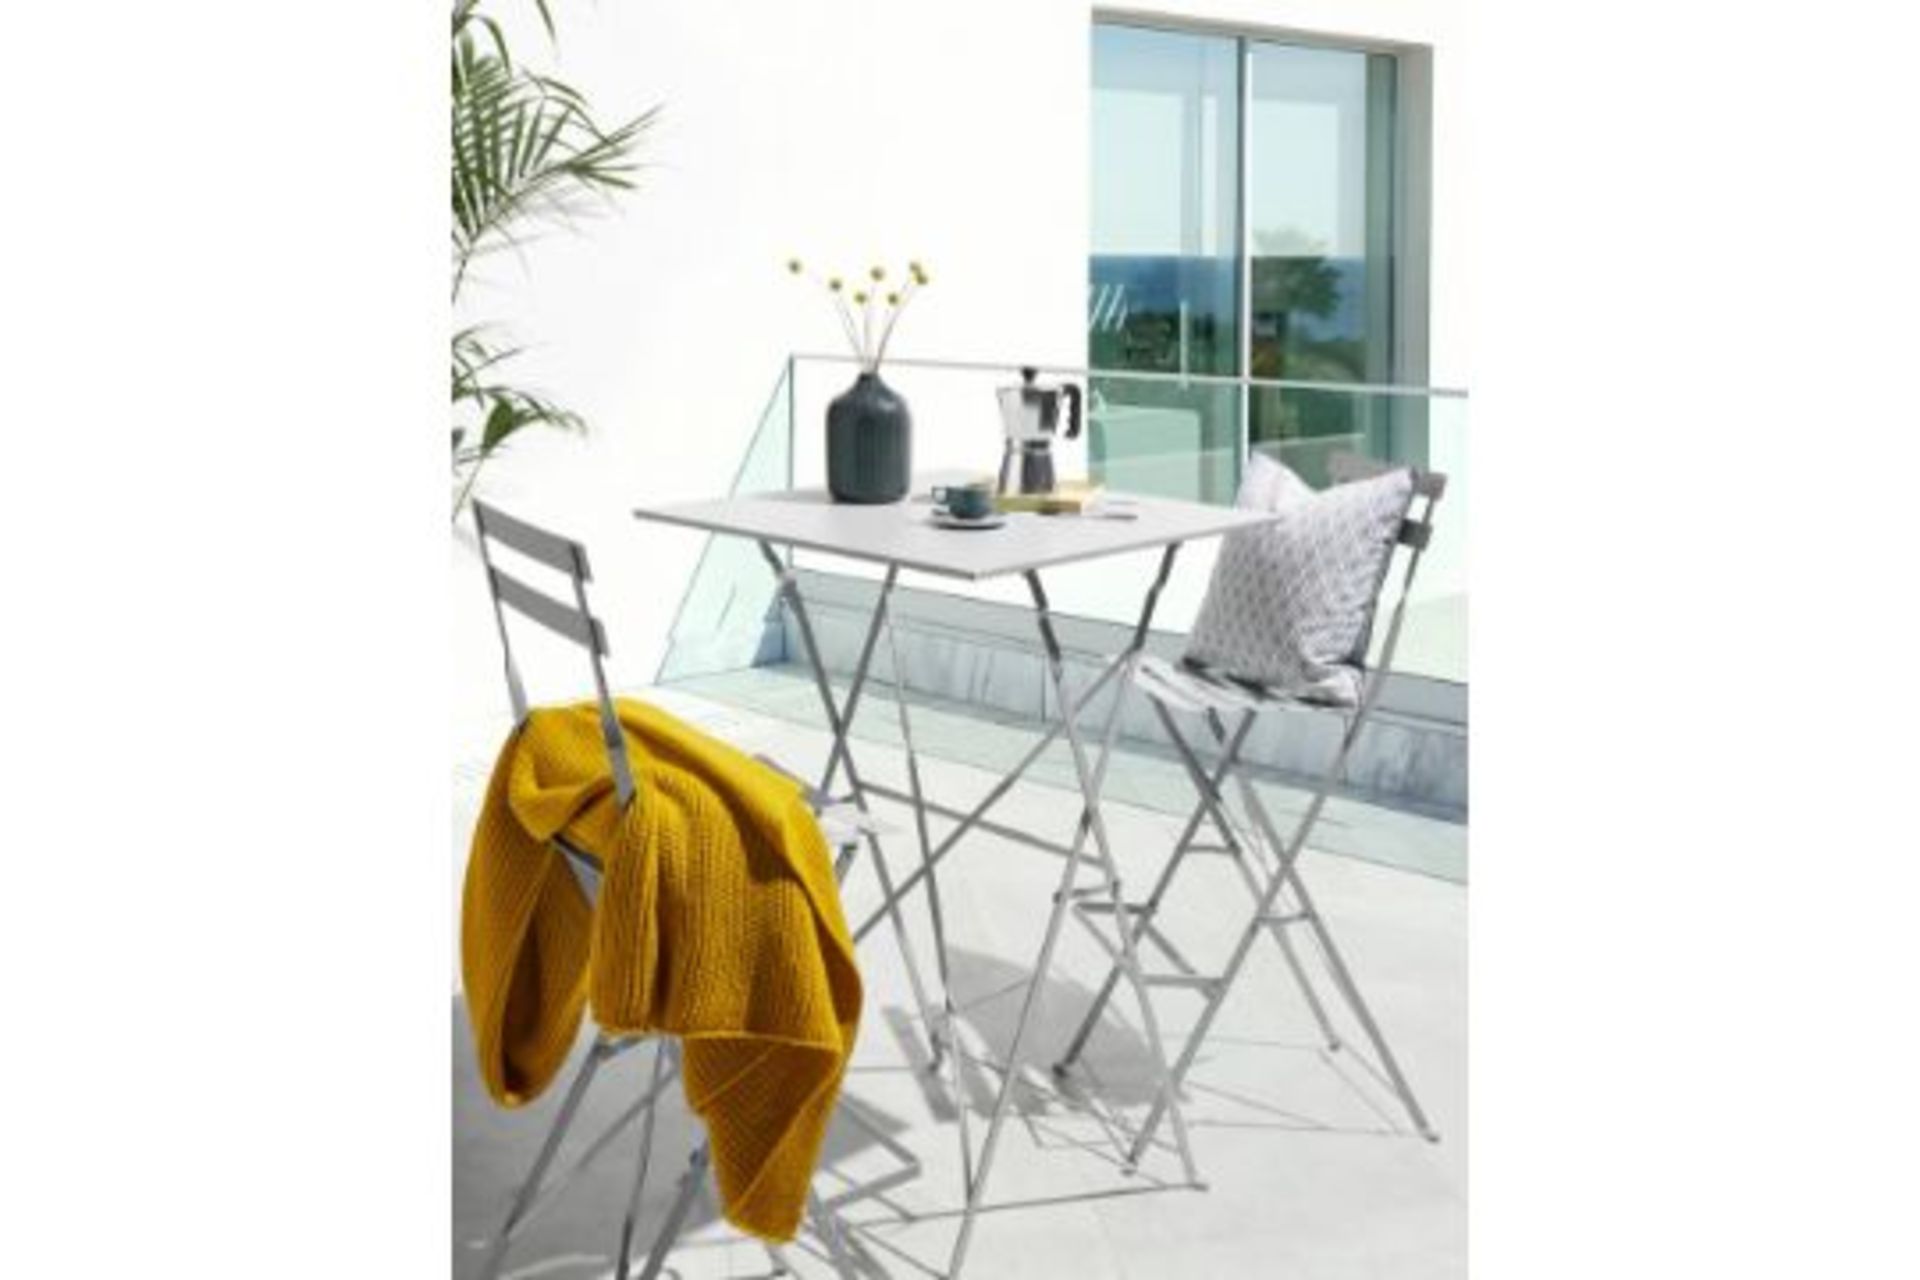 TRADE PALLET TO CONTAIN 6x BRAND NEW Palma Bistro Bar Set GREY. RRP £159 EACH. Liven up your